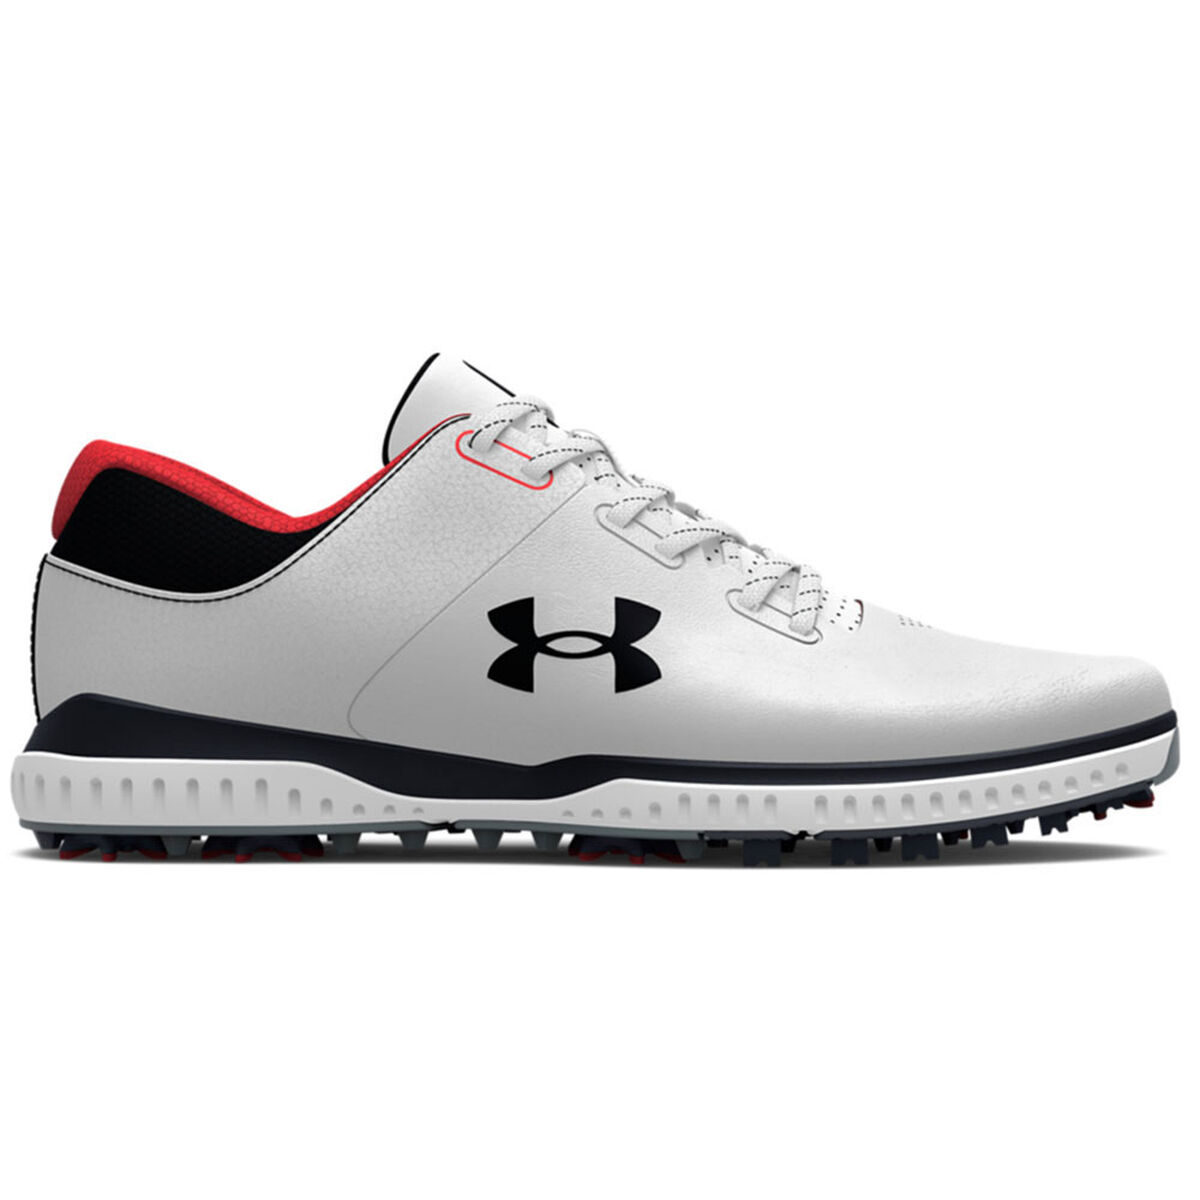 Under Armour Men’s Medal RST Waterproof Spiked Golf Shoes, Mens, White/black/black, 9 | American Golf